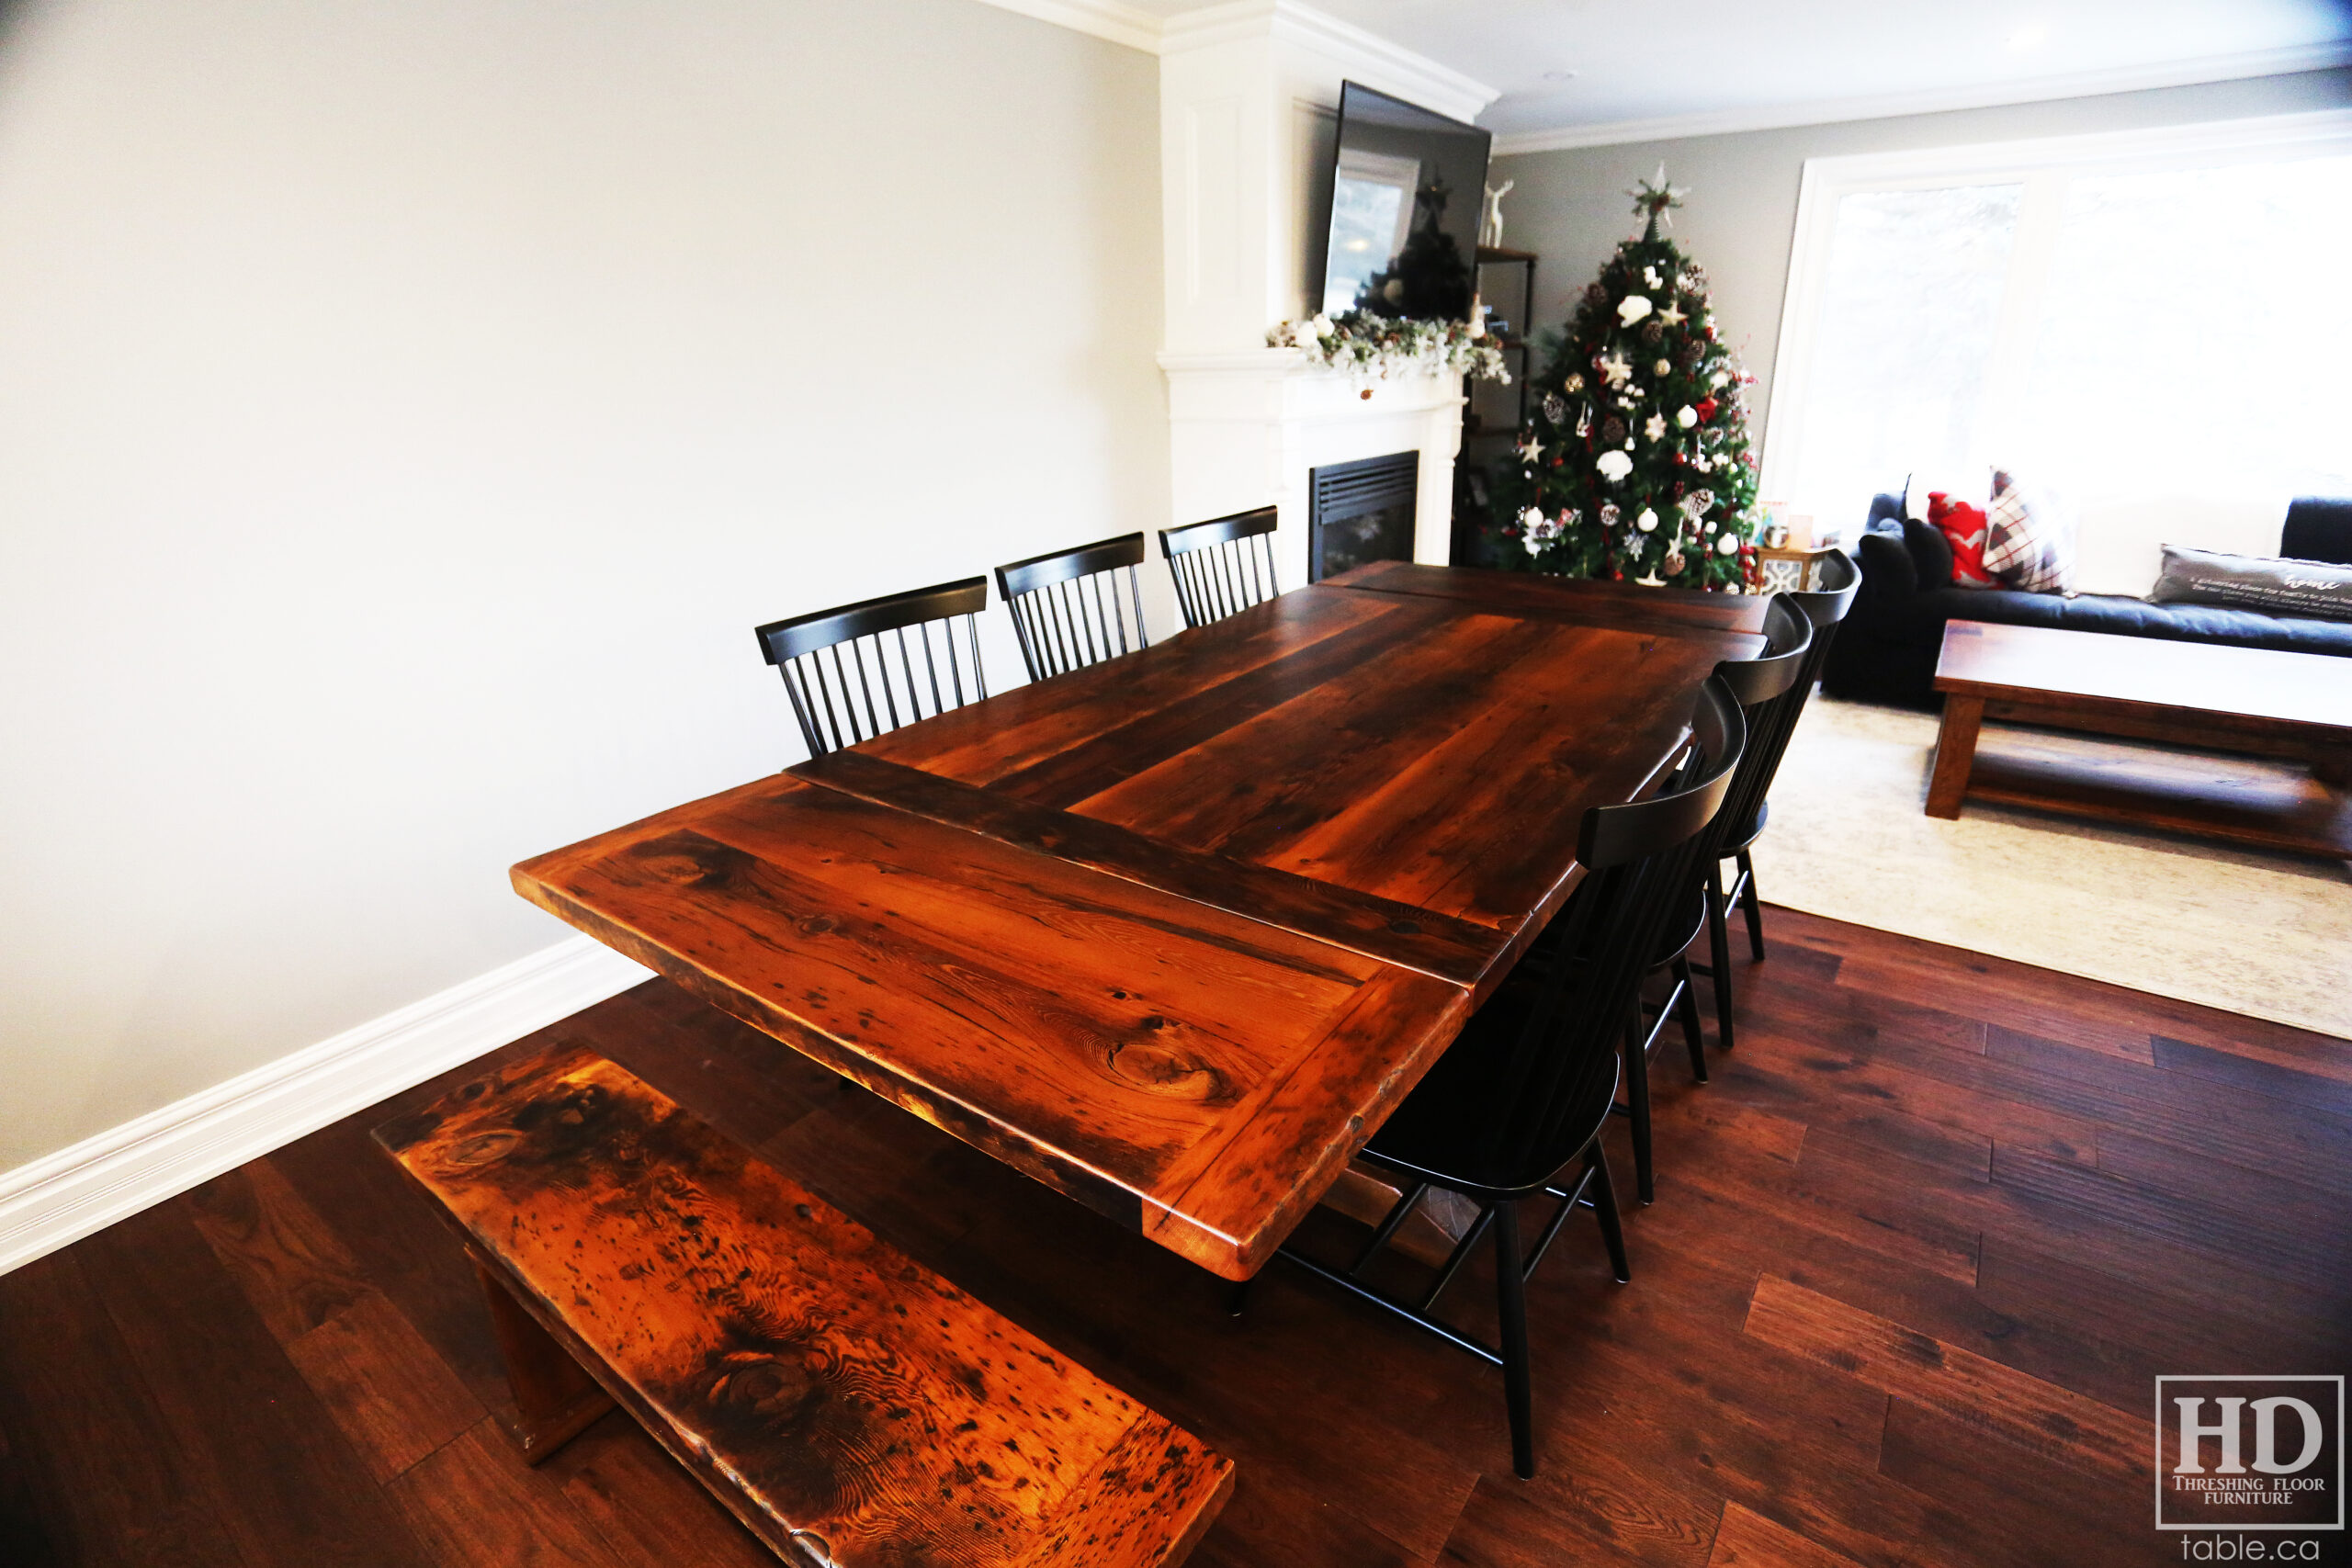 Extendable Reclaimed Wood Table by HD Threshing Floor Furniture / www.table.ca